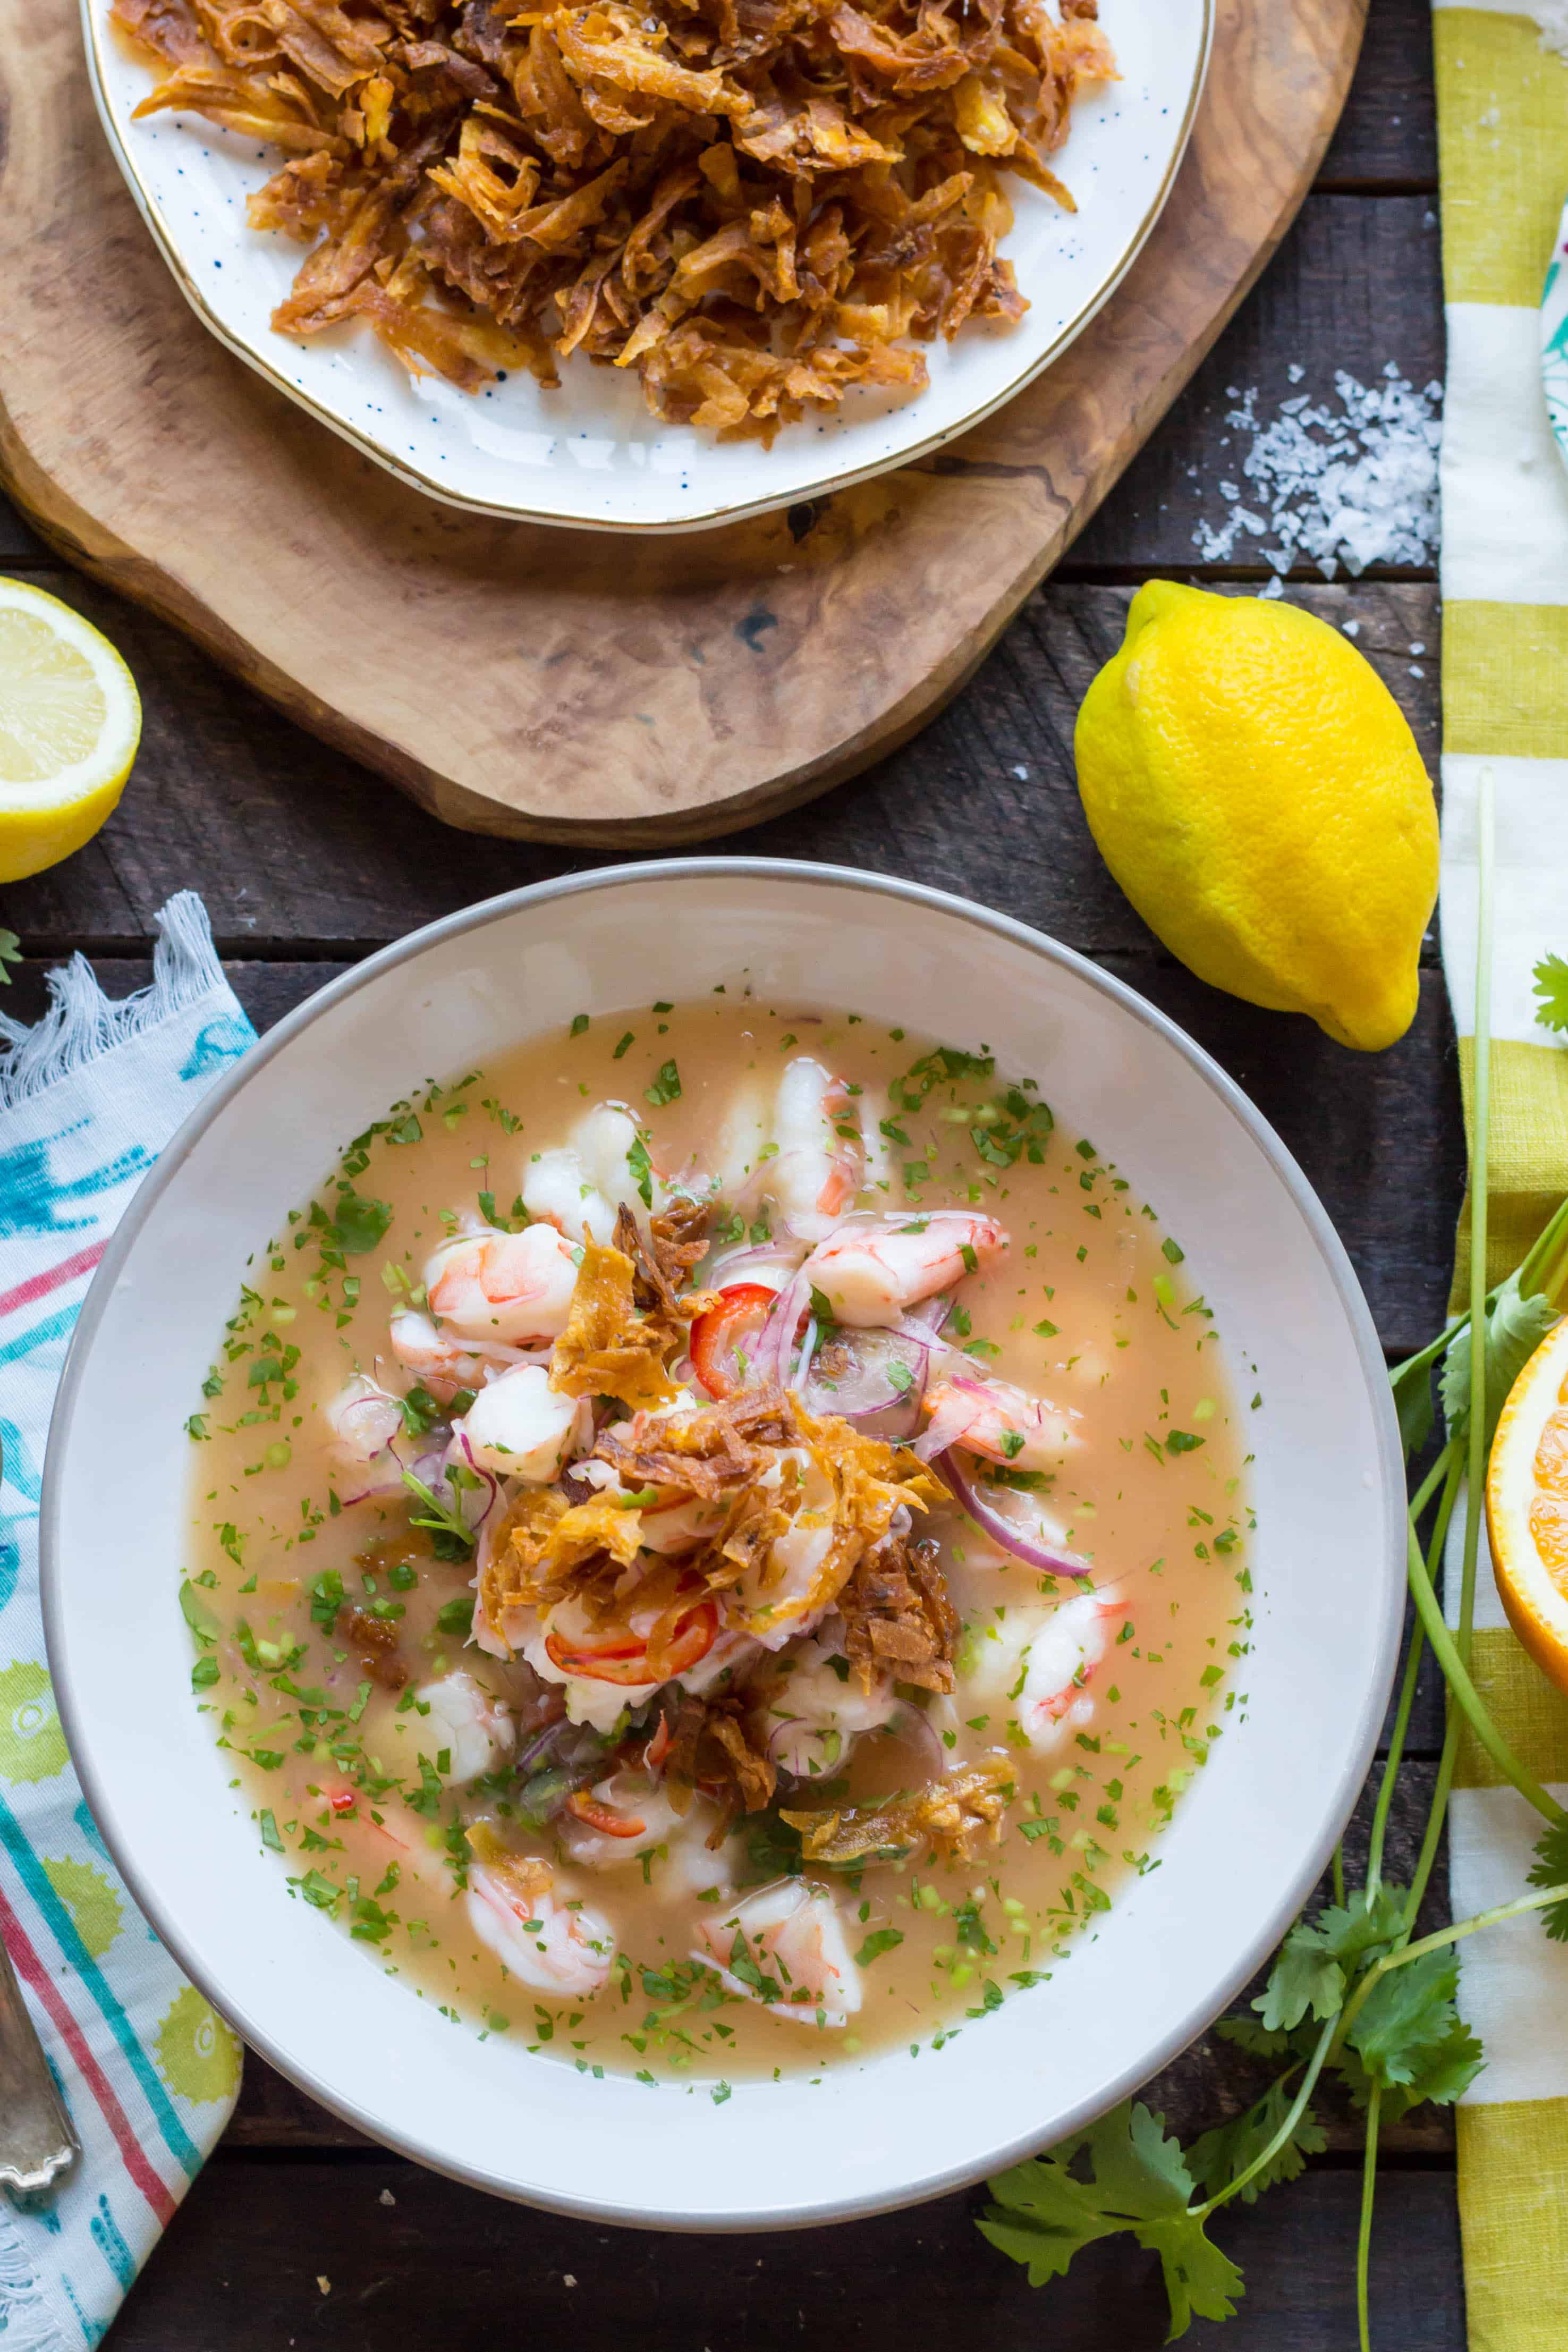 Top view of a soup bowl filled with shrimp ceviche topped with fried shallots.